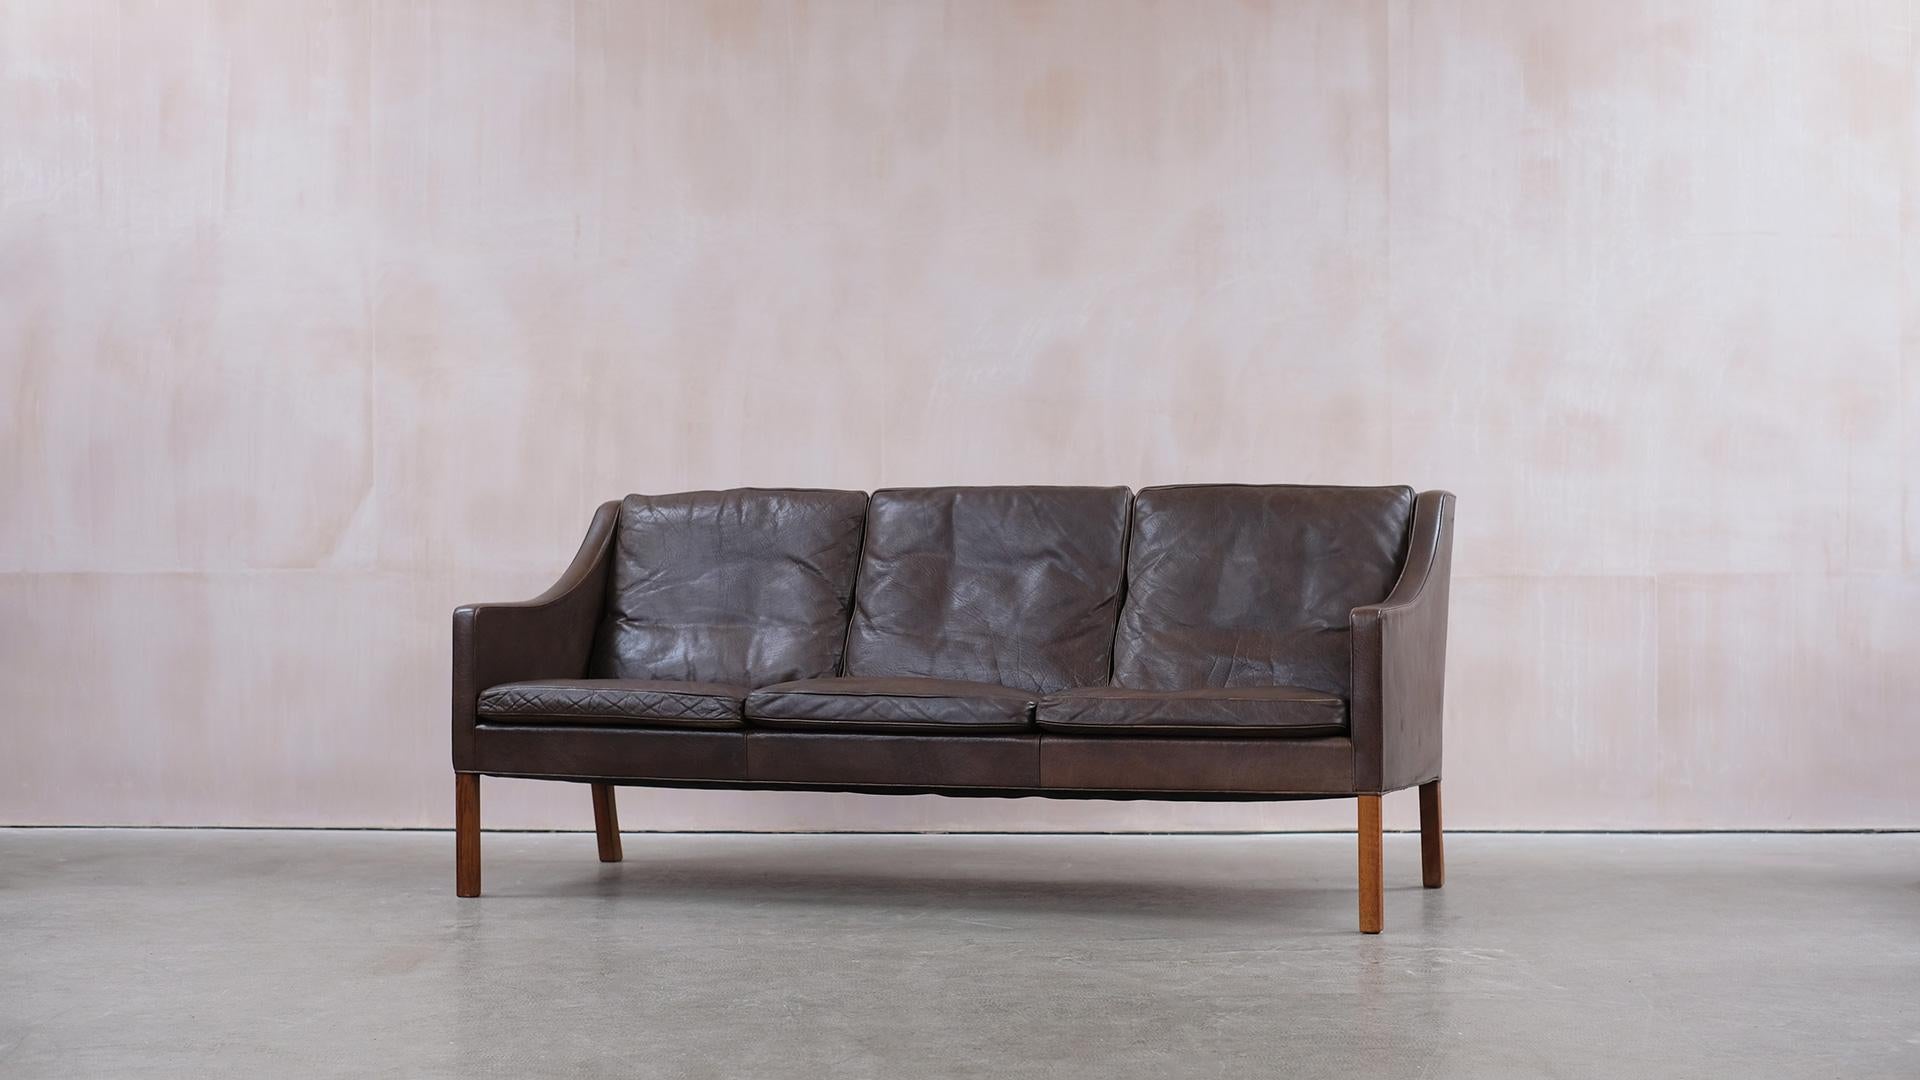 Beautiful example of Børge Mogensen’s classic sofa model 2209 for Fredericia Stolefabrik, Denmark. Designed in 1965, this original sofa is in wonderful condition with soft, thick and supple leather and all down filled cushions. Very elegant and